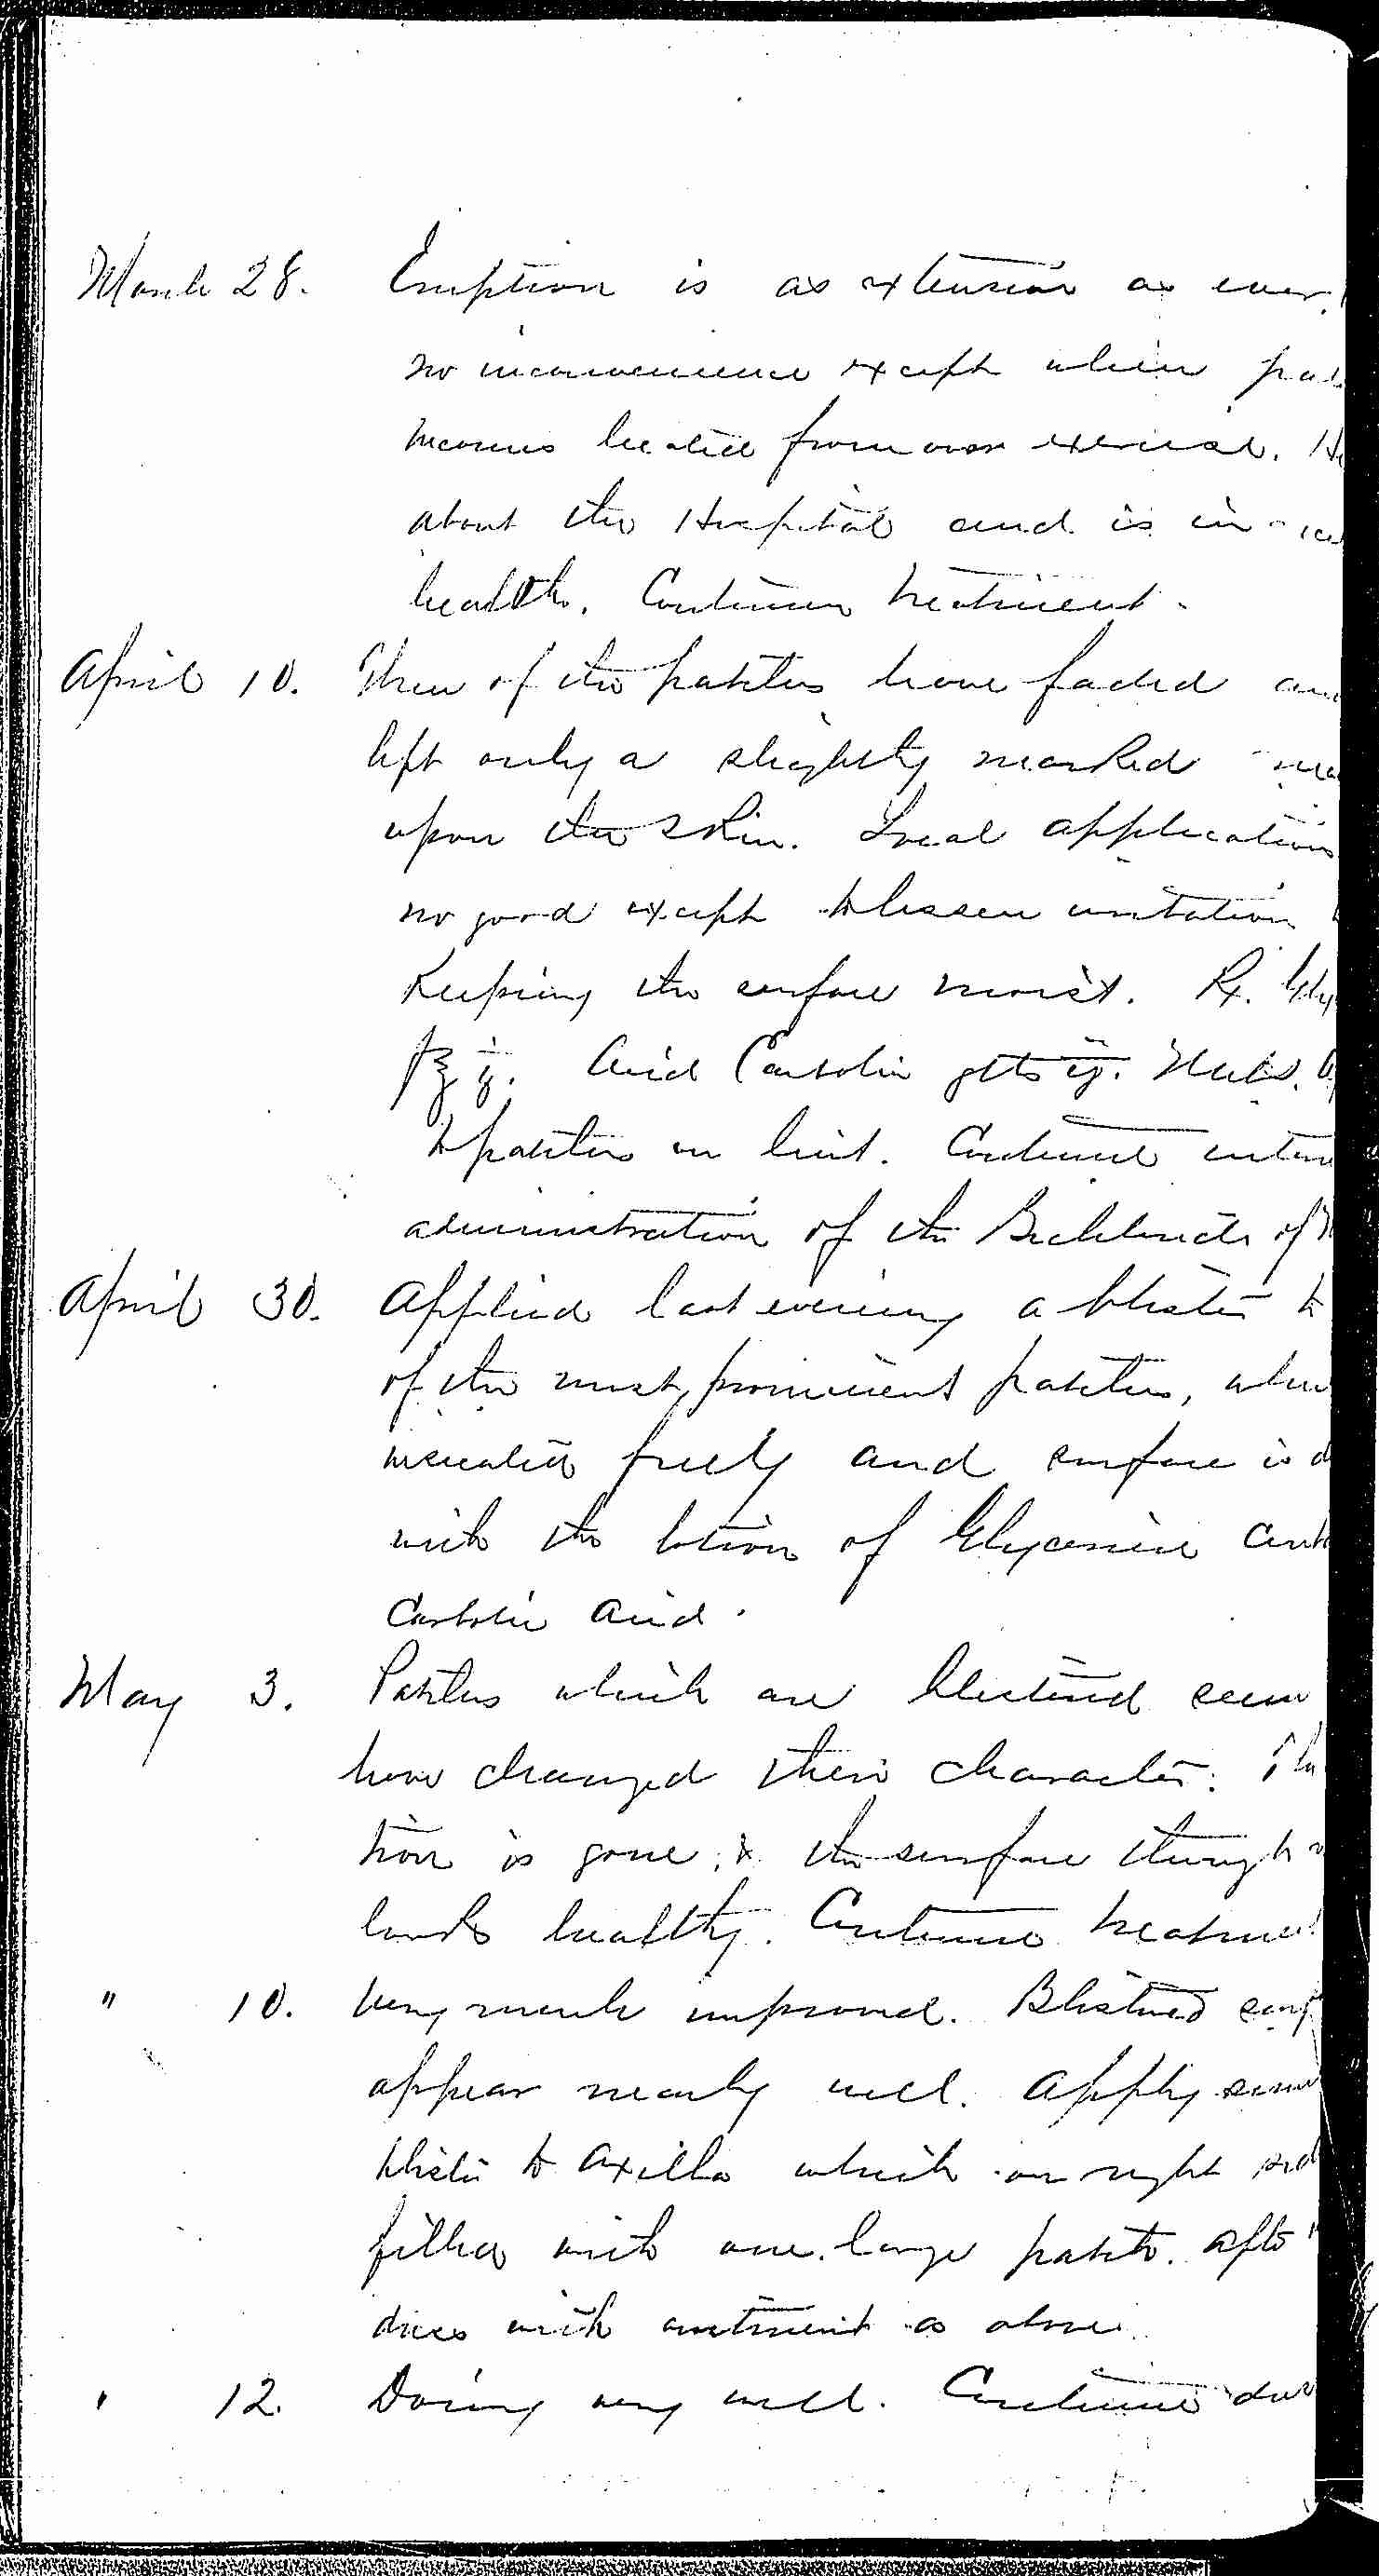 Entry for Edward Davis (page 4 of 6) in the log Hospital Tickets and Case Papers - Naval Hospital - Washington, D.C. - 1868-69